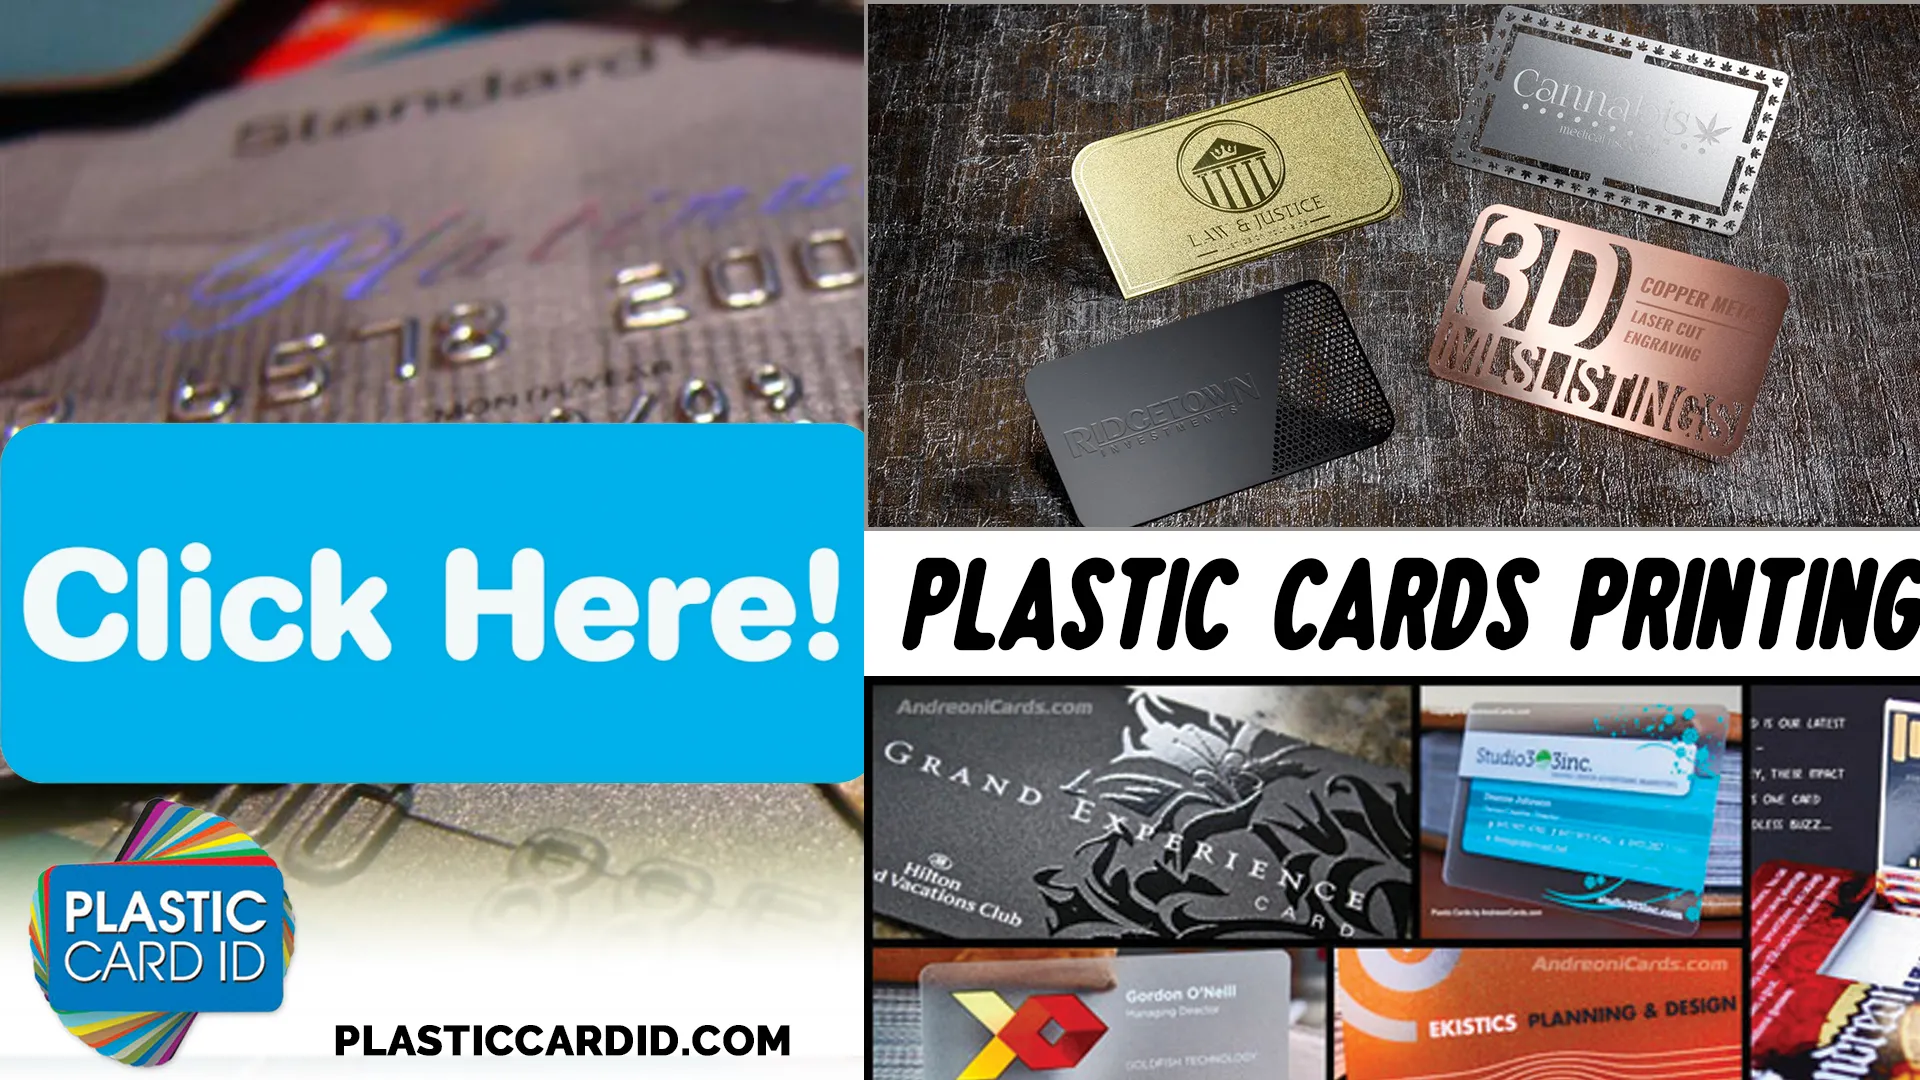 Personalize the Customer Experience with QR Code Plastic Cards